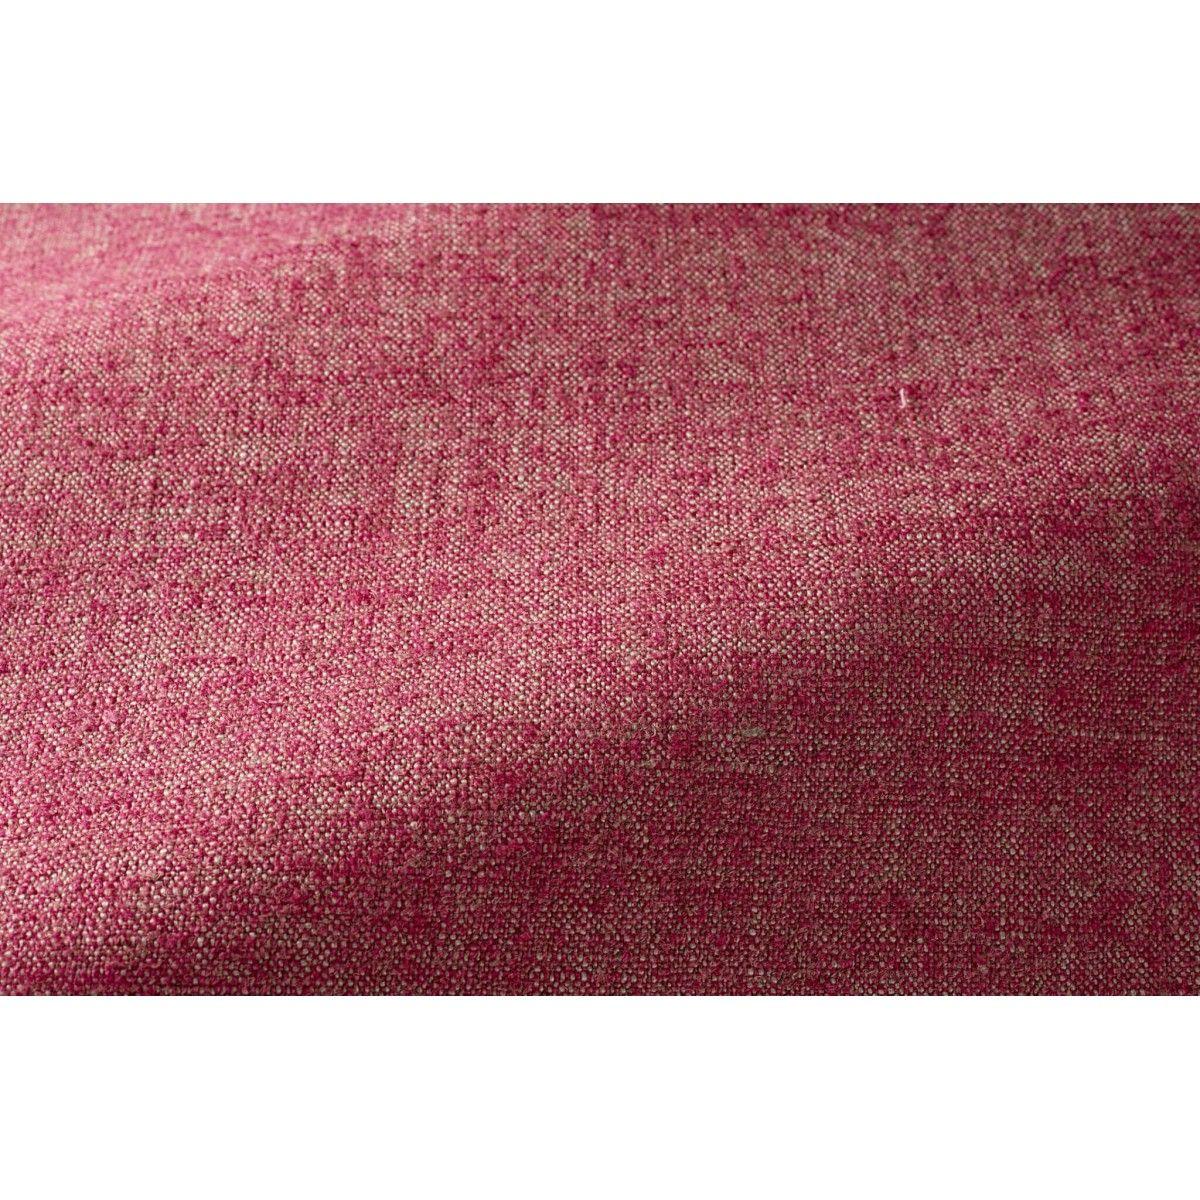 Popus Editions Giovanna 4 Seater Sofa in Fuschia London Linen Fabric

Giovanna is a sofa with a strong profile. A sober, plush line, with this famous detail that changes everything, so as not to forget its strength of character and this charming